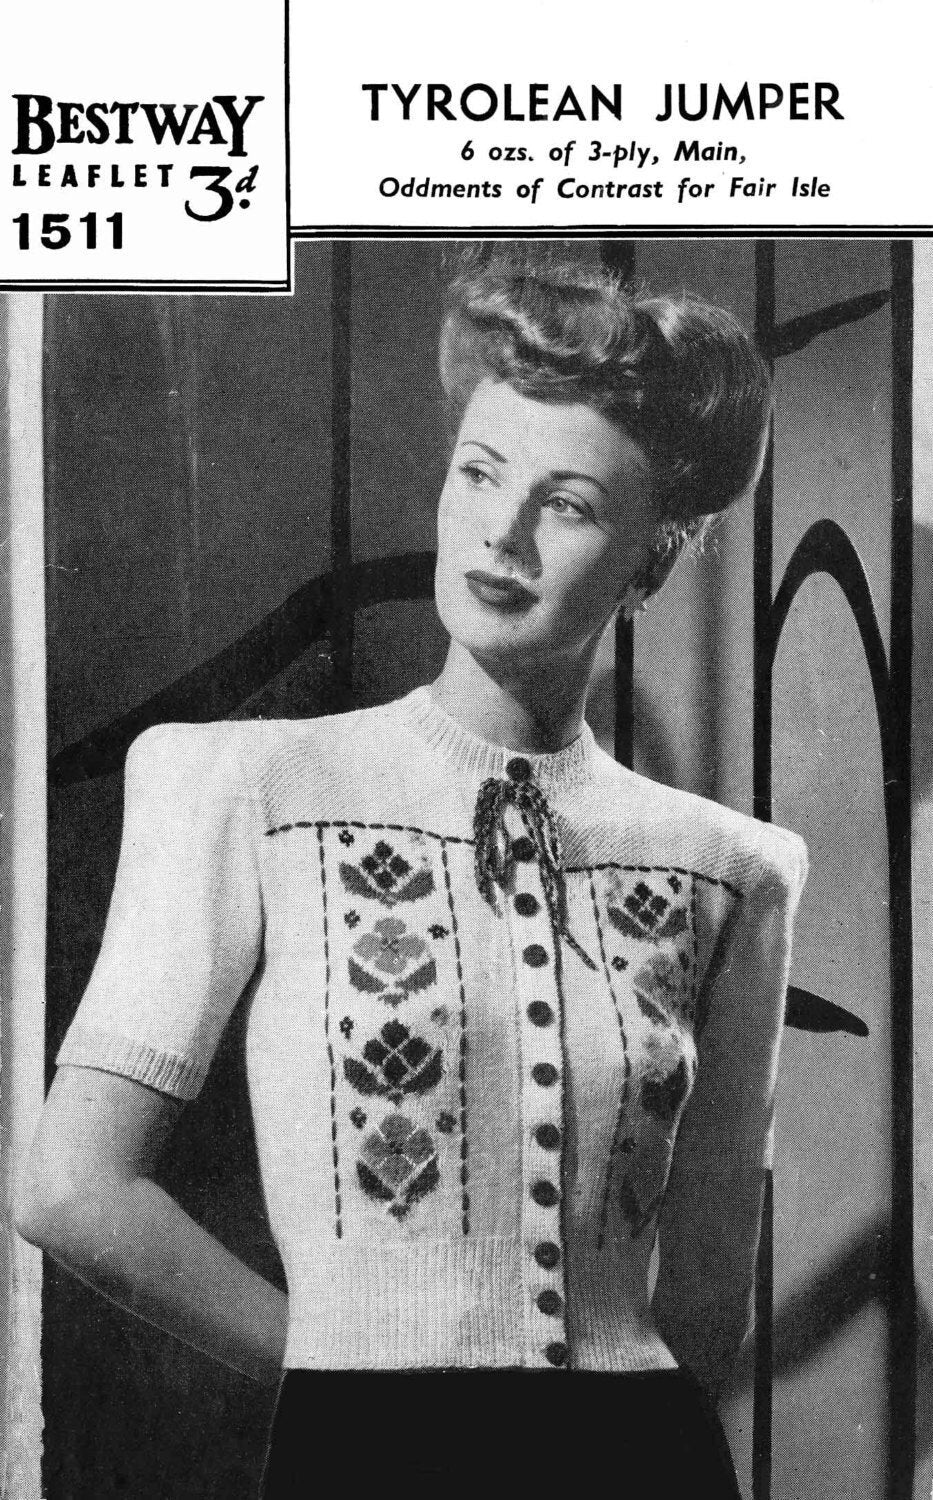 Ladies Tyrolean Jumper with Fare Isle Panels, 35" Bust, 3ply, 40s Knitting Pattern, Bestway 1511